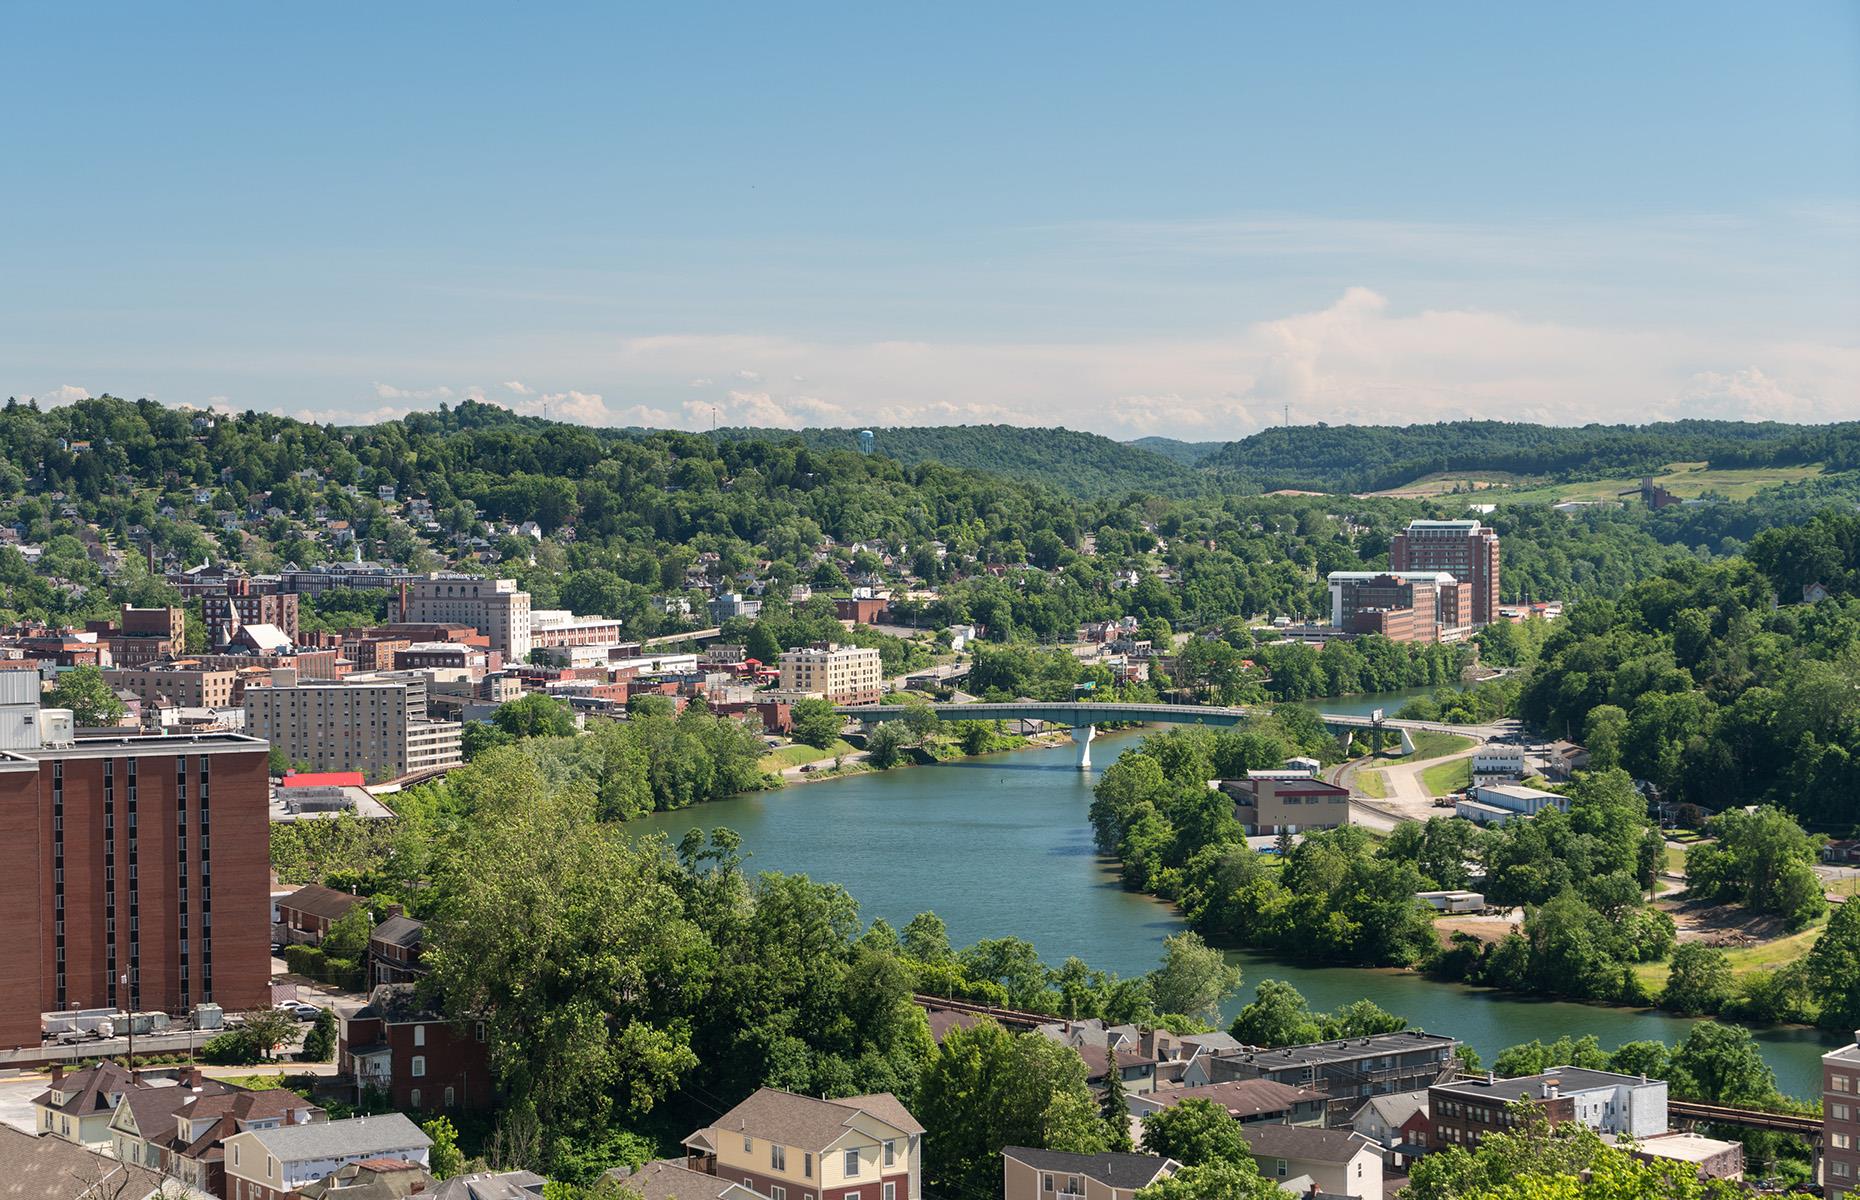 <p>While the Mountain State doesn't have a dedicated foodie tour just yet, its <a href="https://mylanpark.org/tasteofmorgantown/">gourmet festival</a> in cute Morgantown (pictured) is the next best thing. Taste of Morgantown sees a plethora of vendors come together to showcase West Virginia's foodie spoils: sample everything from Italian dishes and barbecue plates to tacos and burgers. </p>